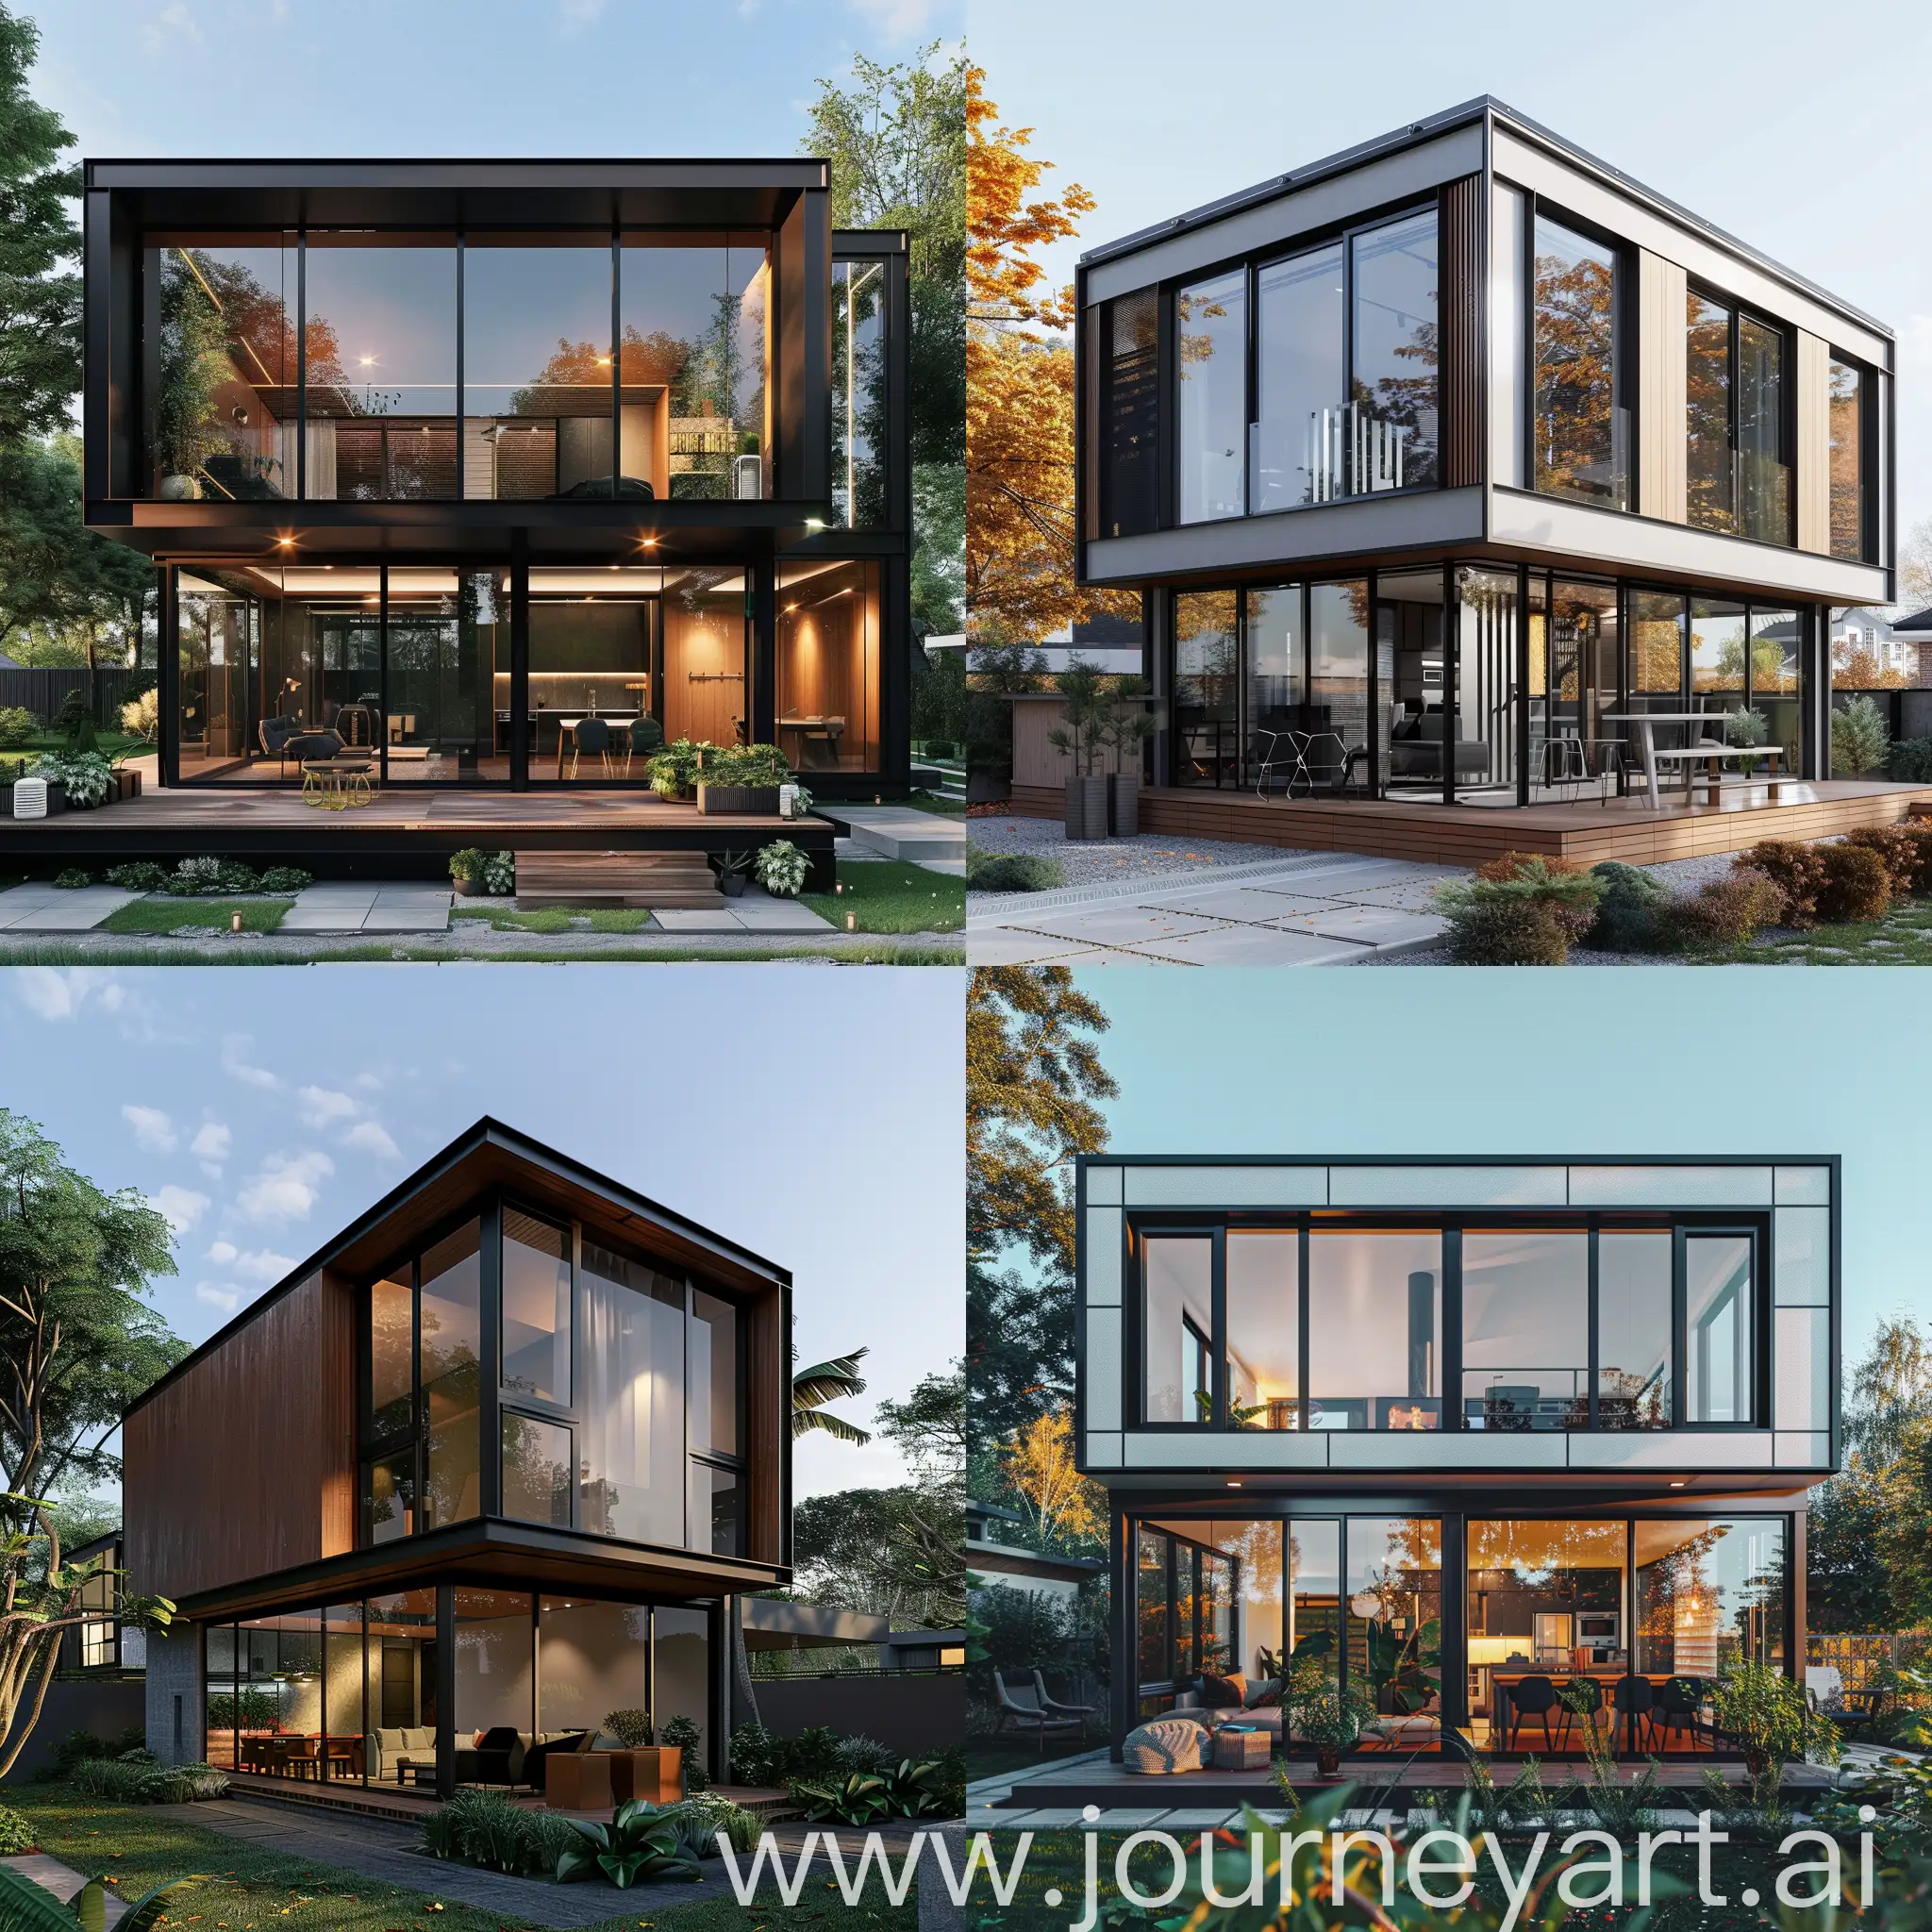 Modern-30-Square-Meter-Modular-House-with-Panoramic-Glazing-Visualization